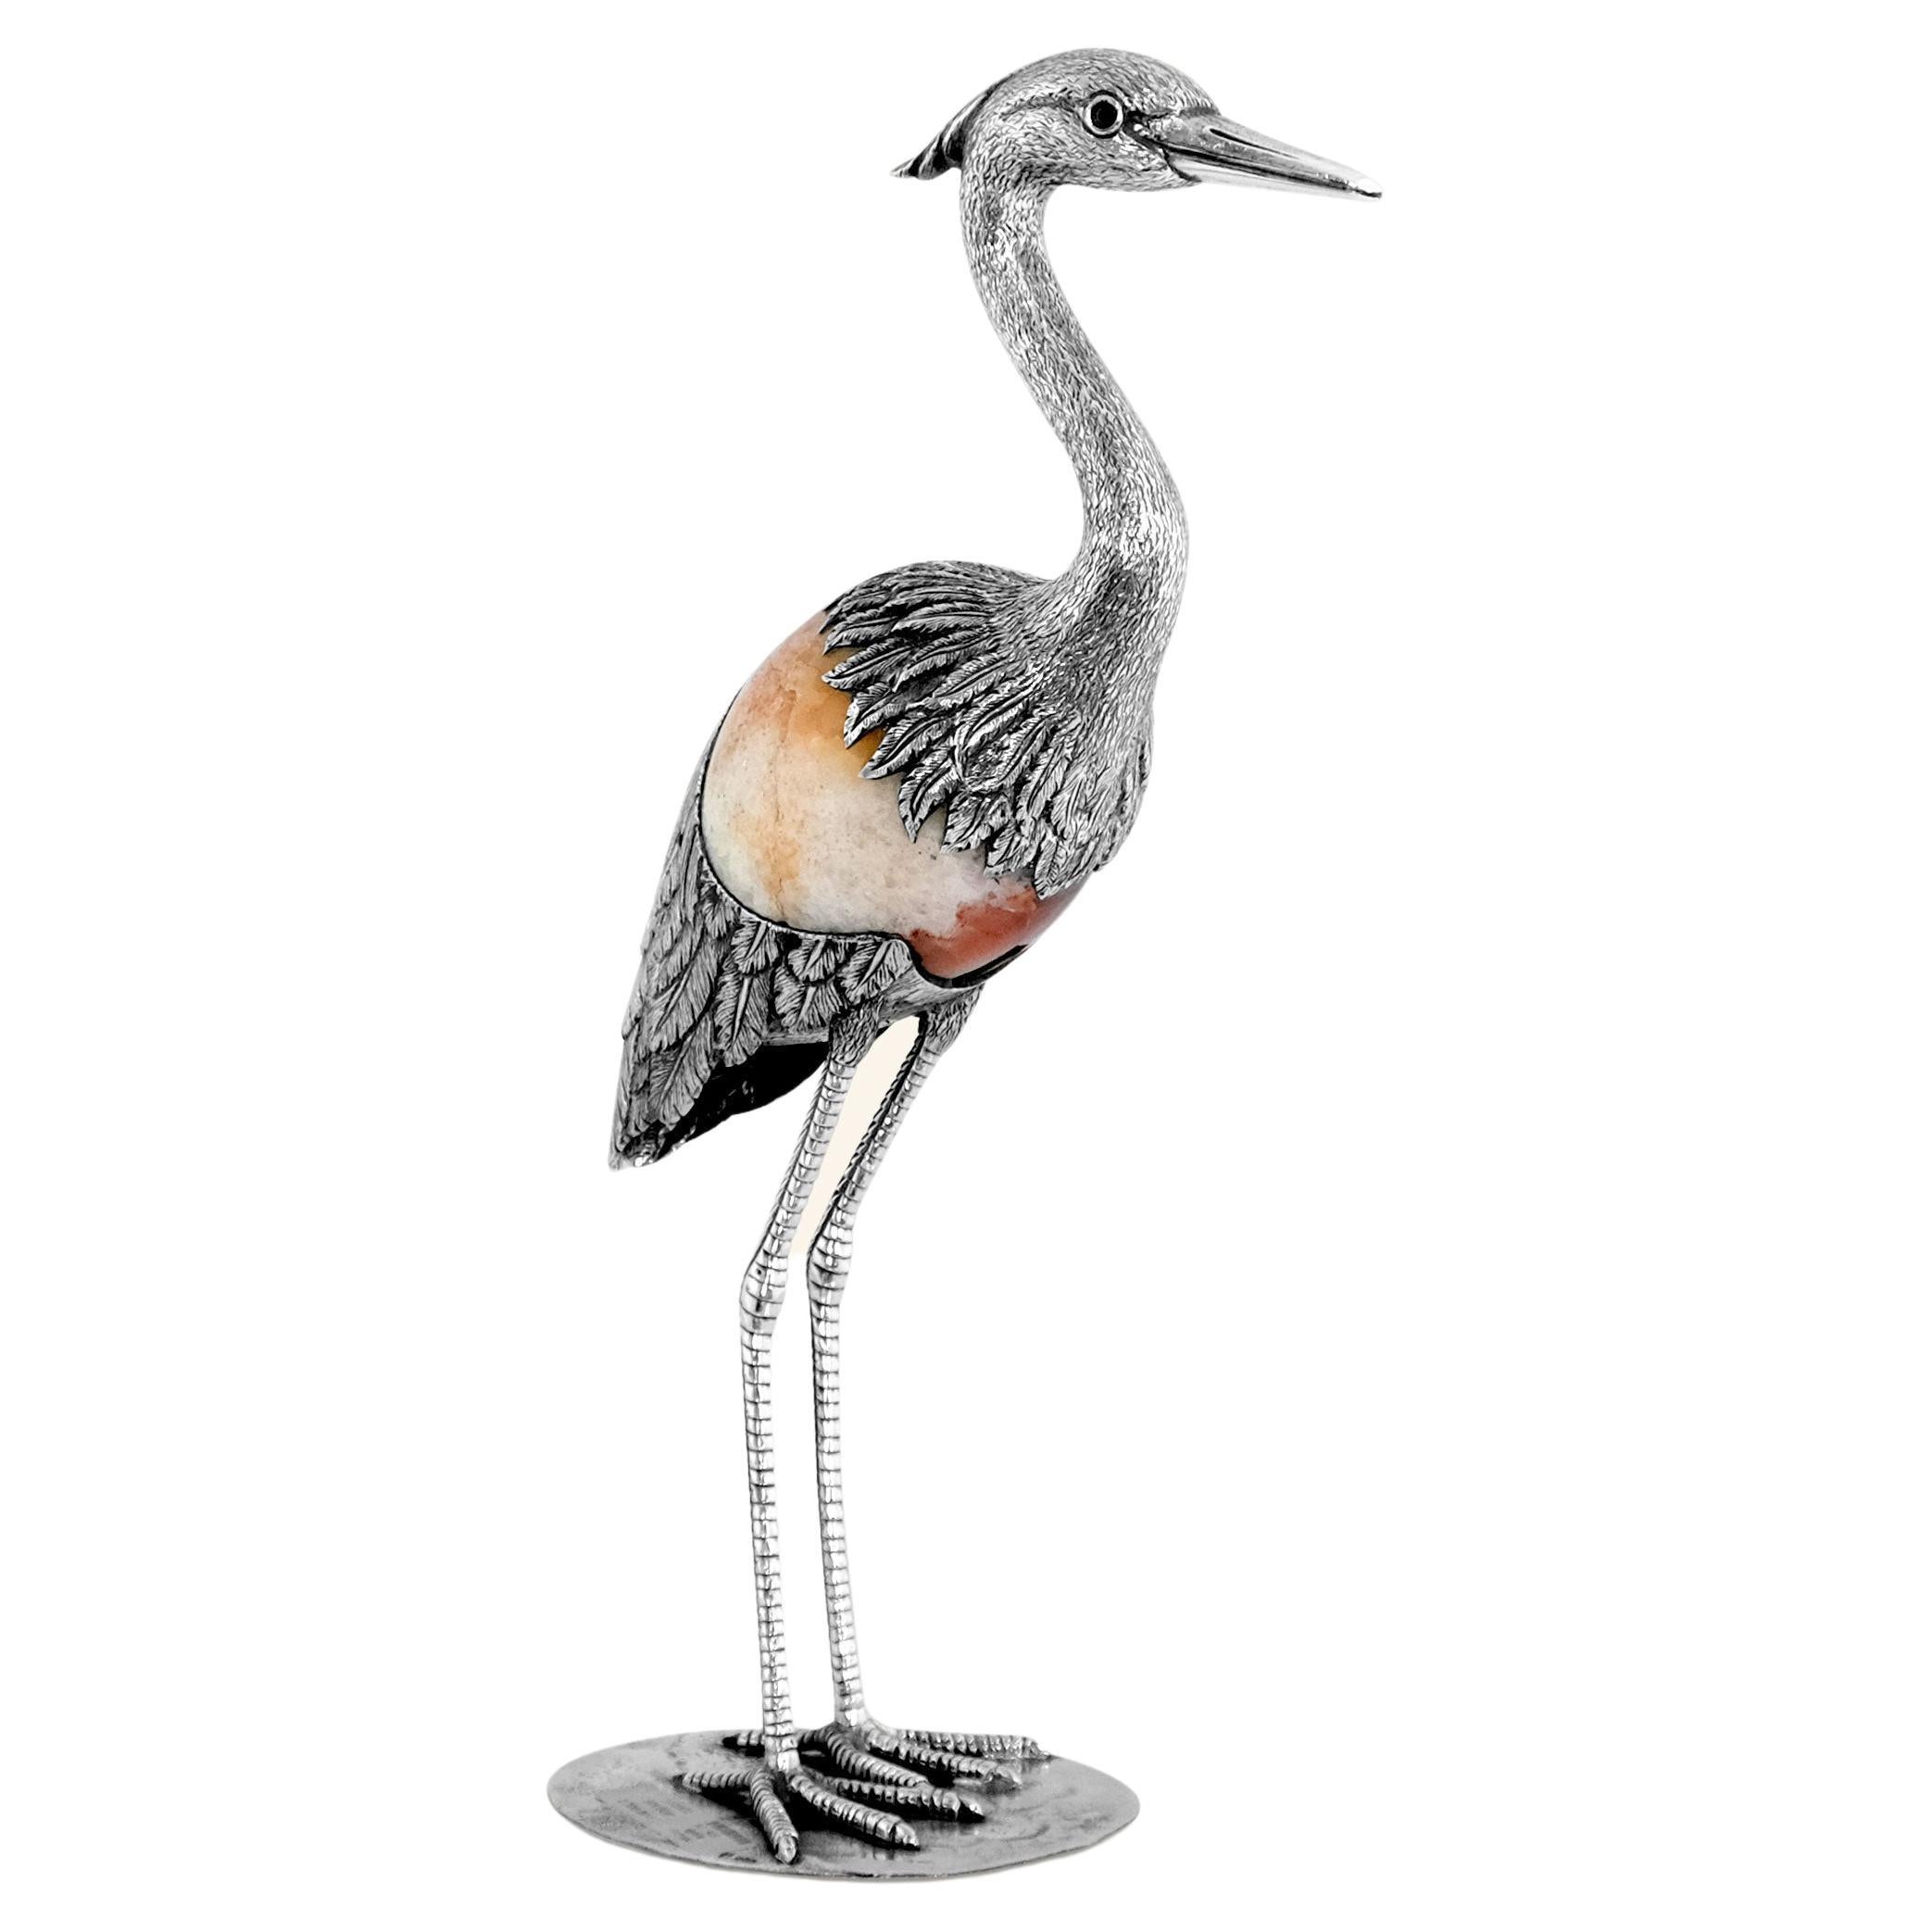 Heron N2º by Alcino Silversmith Handcrafted in Sterling Silver with Orange Agate For Sale